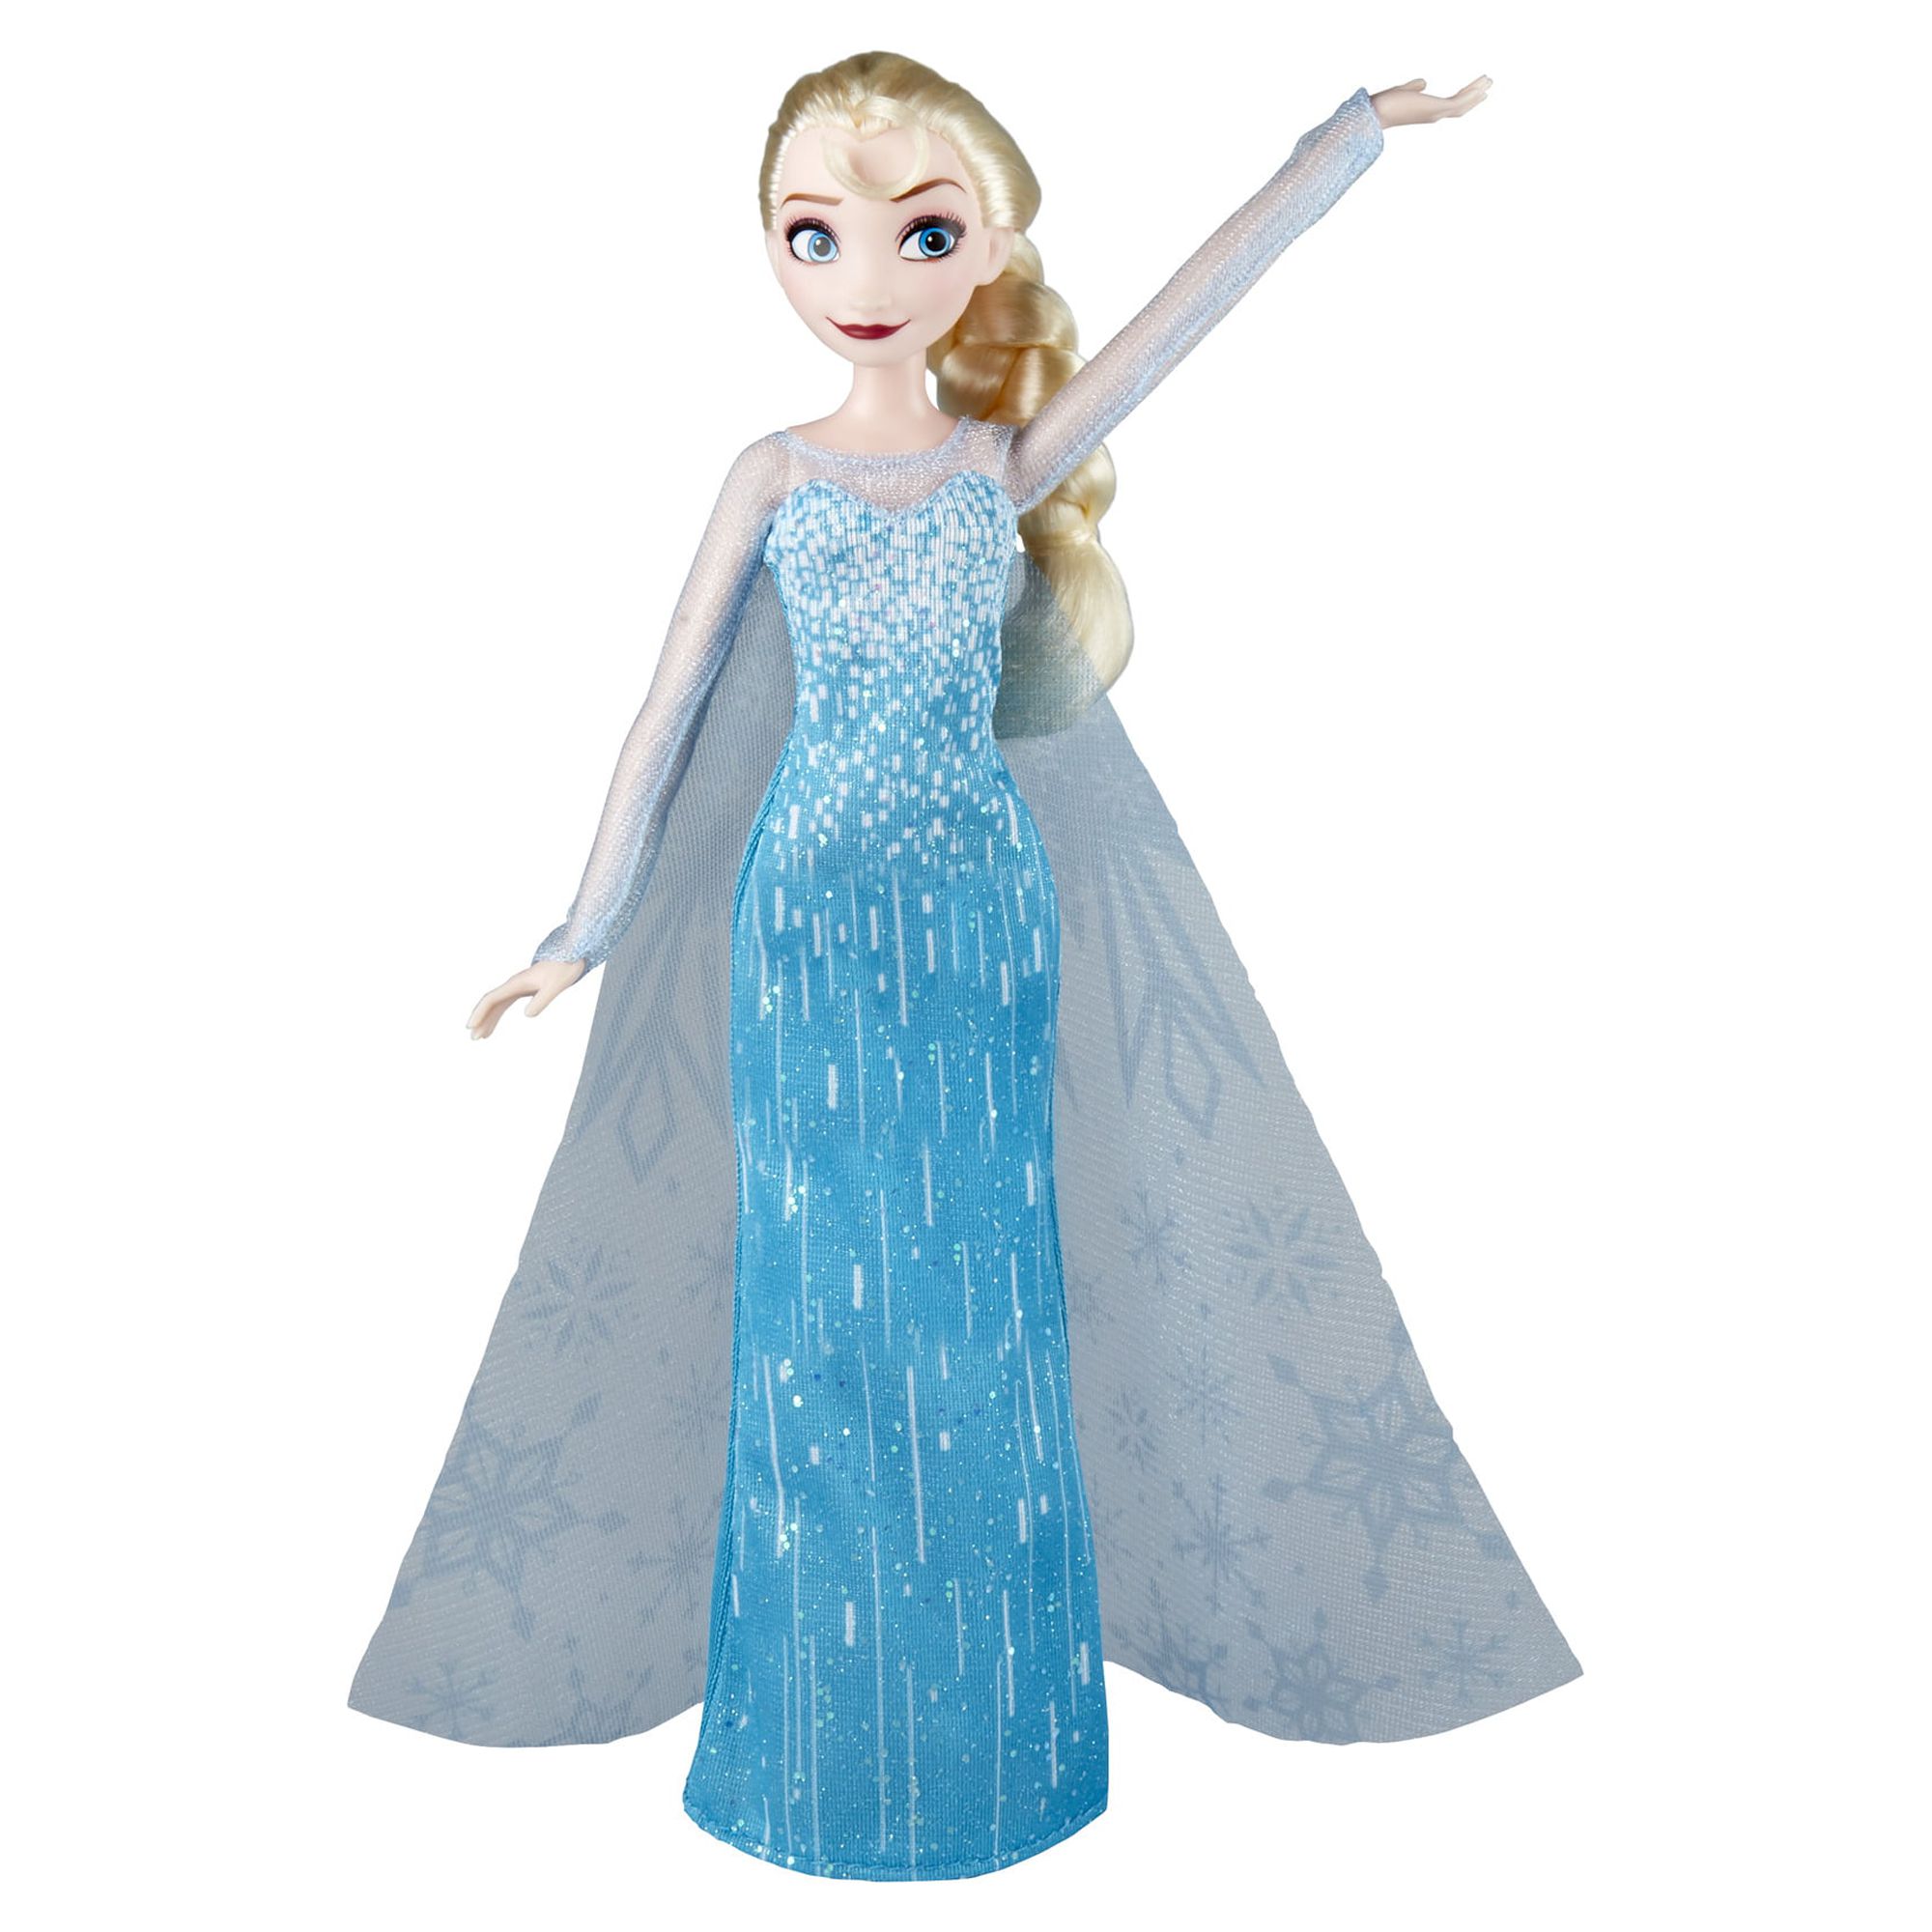 Disney Frozen Classic Fashion Elsa, for Kids Ages 3 and up, Includes Outfit and Shoes - image 4 of 7